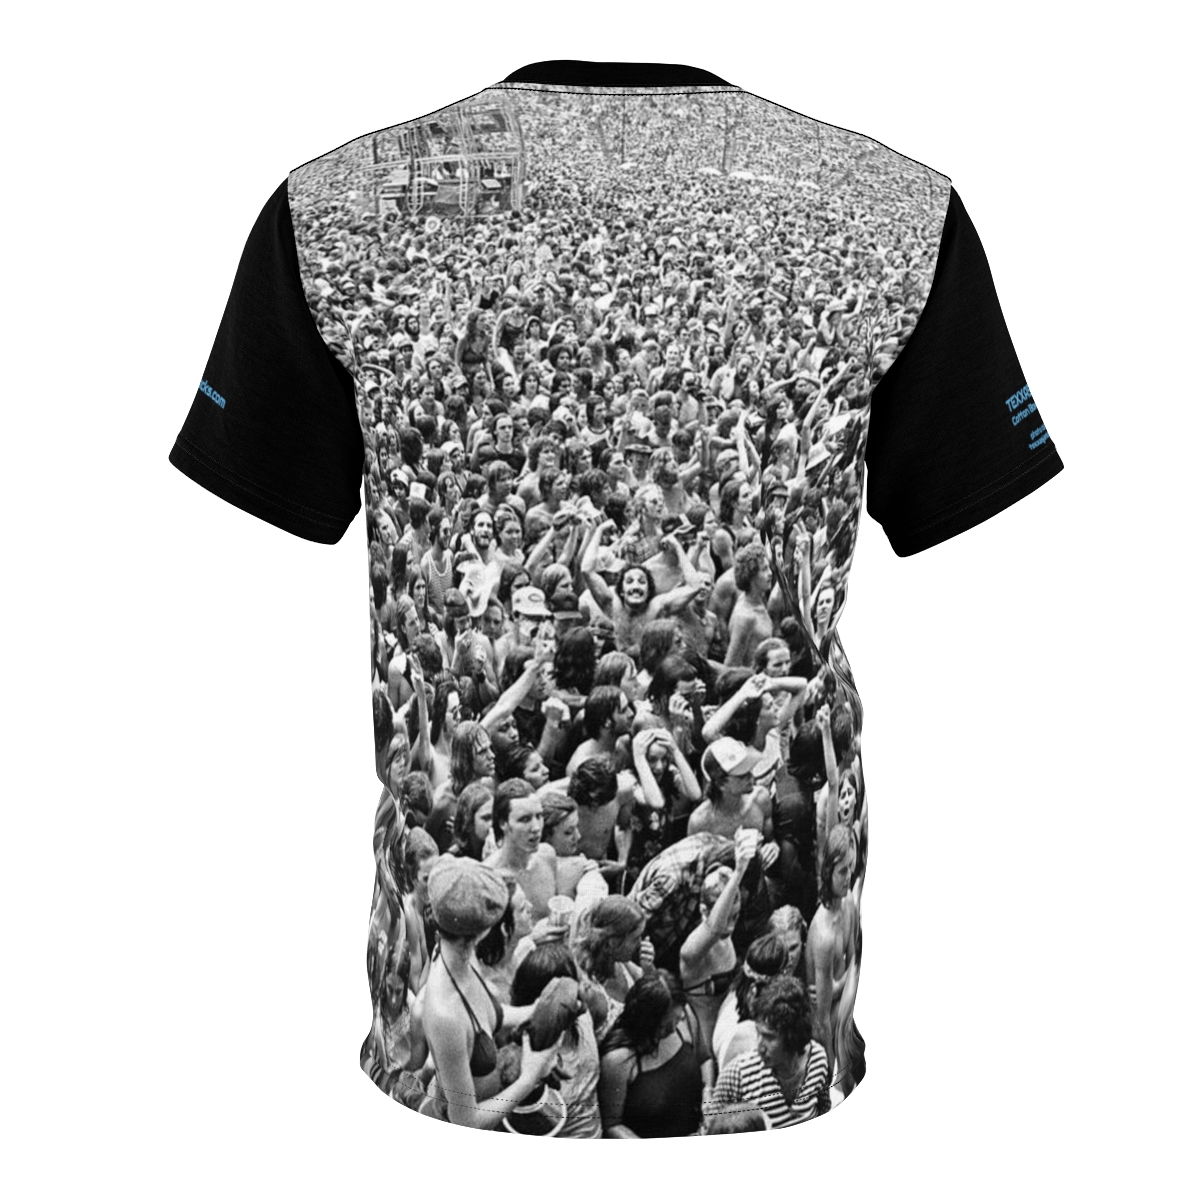 THE ZOO Texxas Jam Crowd Shirt (LIMITED EDITION) product thumbnail image